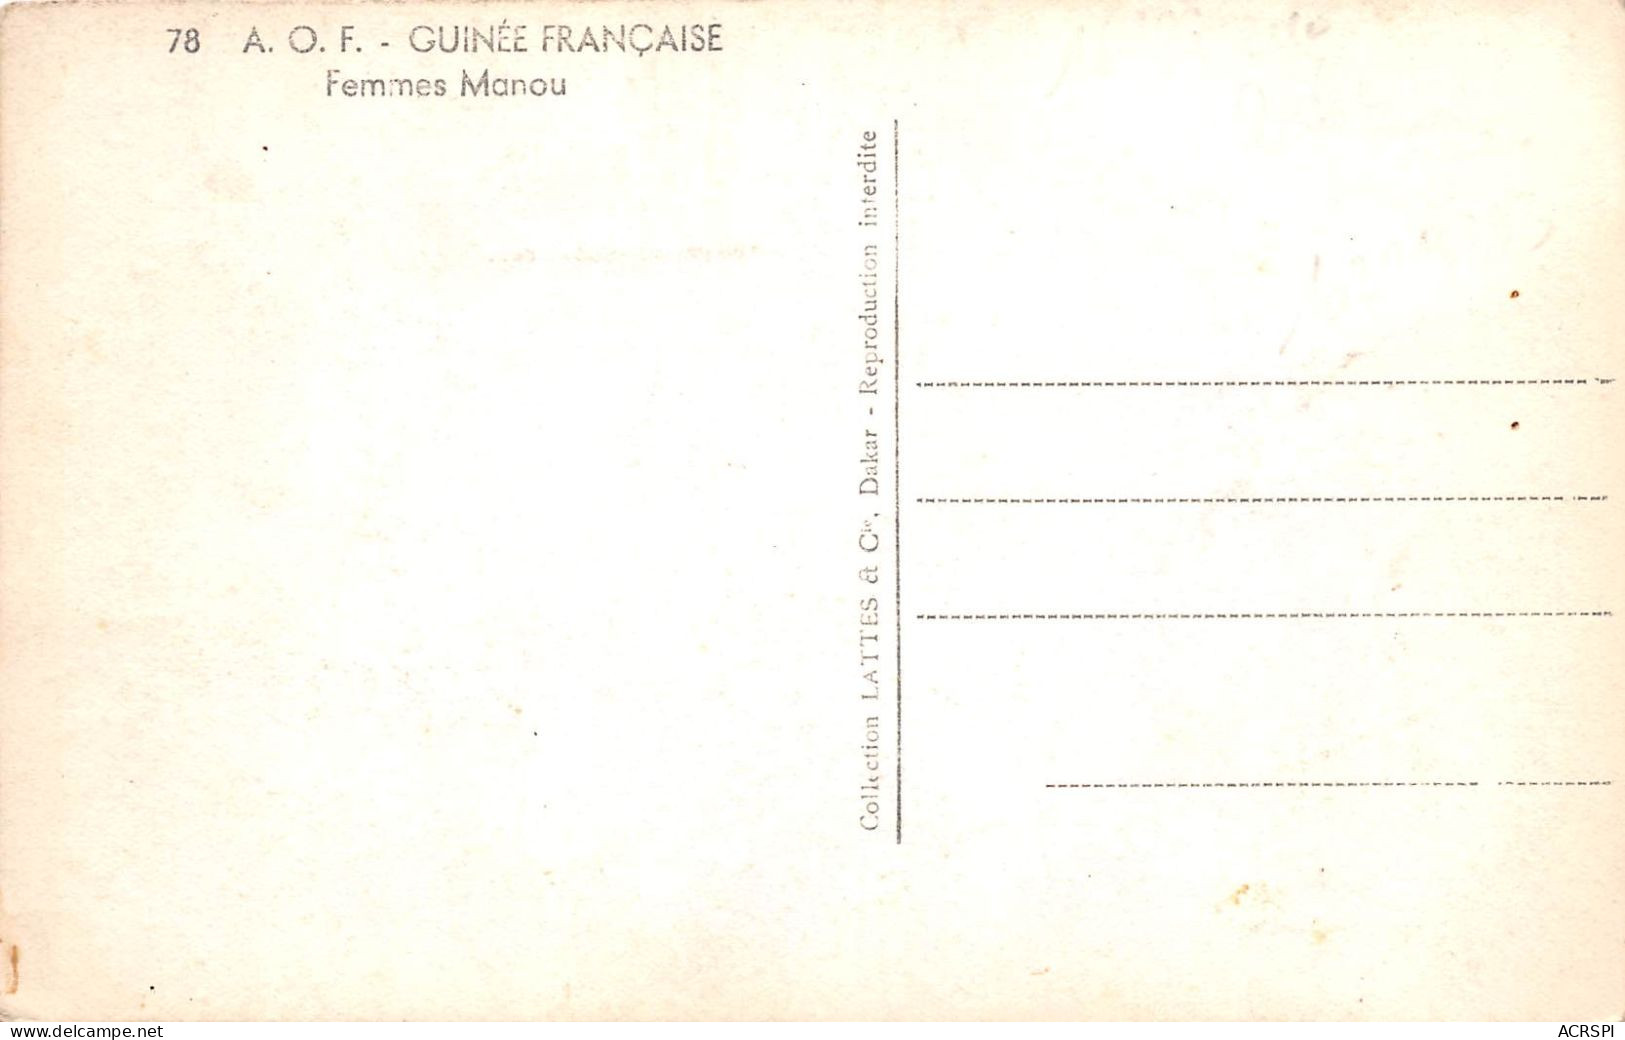 GUINEE FRANCAISE  Femmes MANOU Conakry (scan Recto-verso) OO 0958 - Guinea Francese